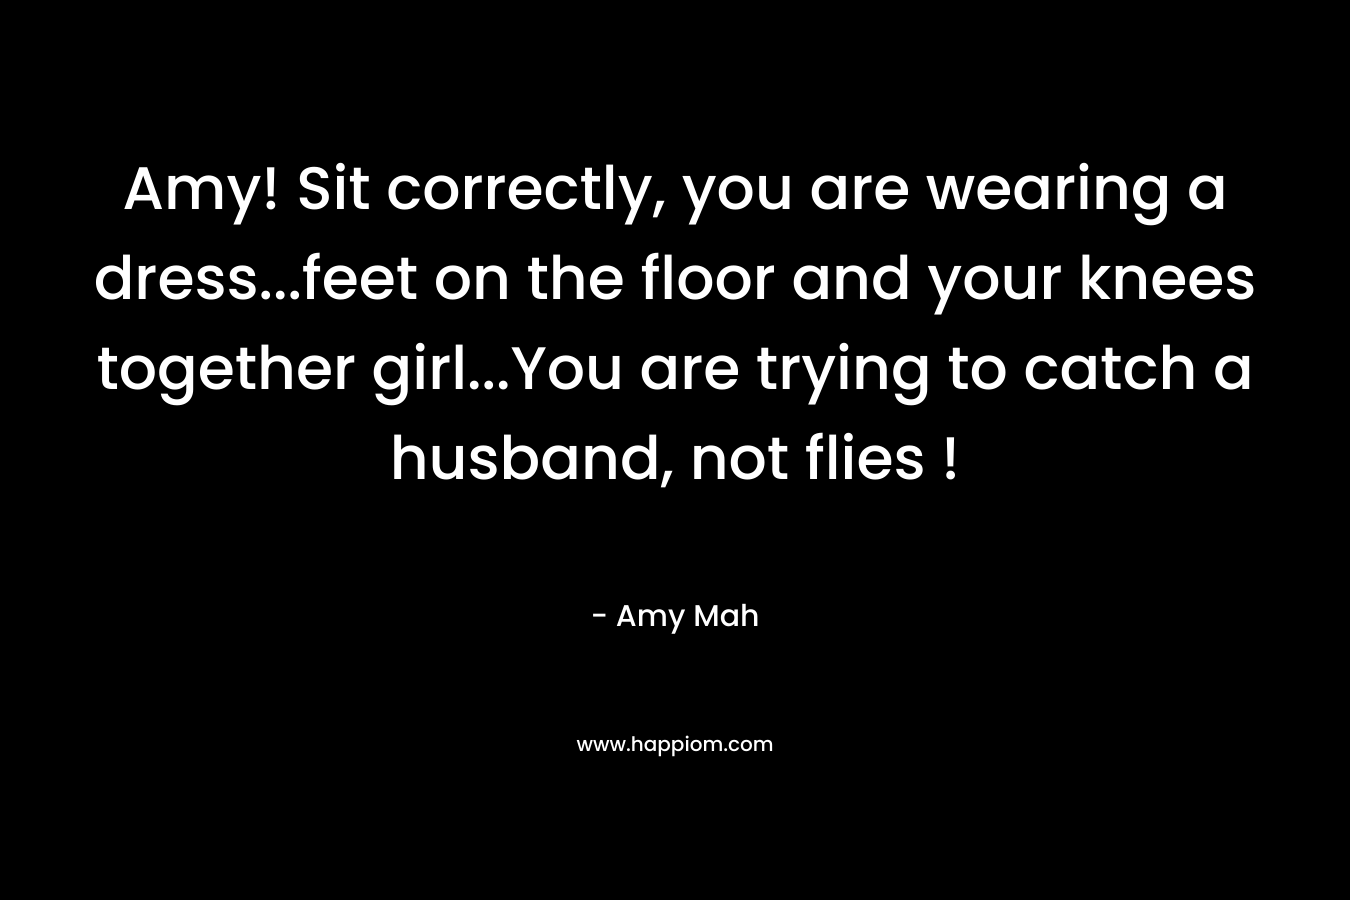 Amy! Sit correctly, you are wearing a dress…feet on the floor and your knees together girl…You are trying to catch a husband, not flies ! – Amy Mah